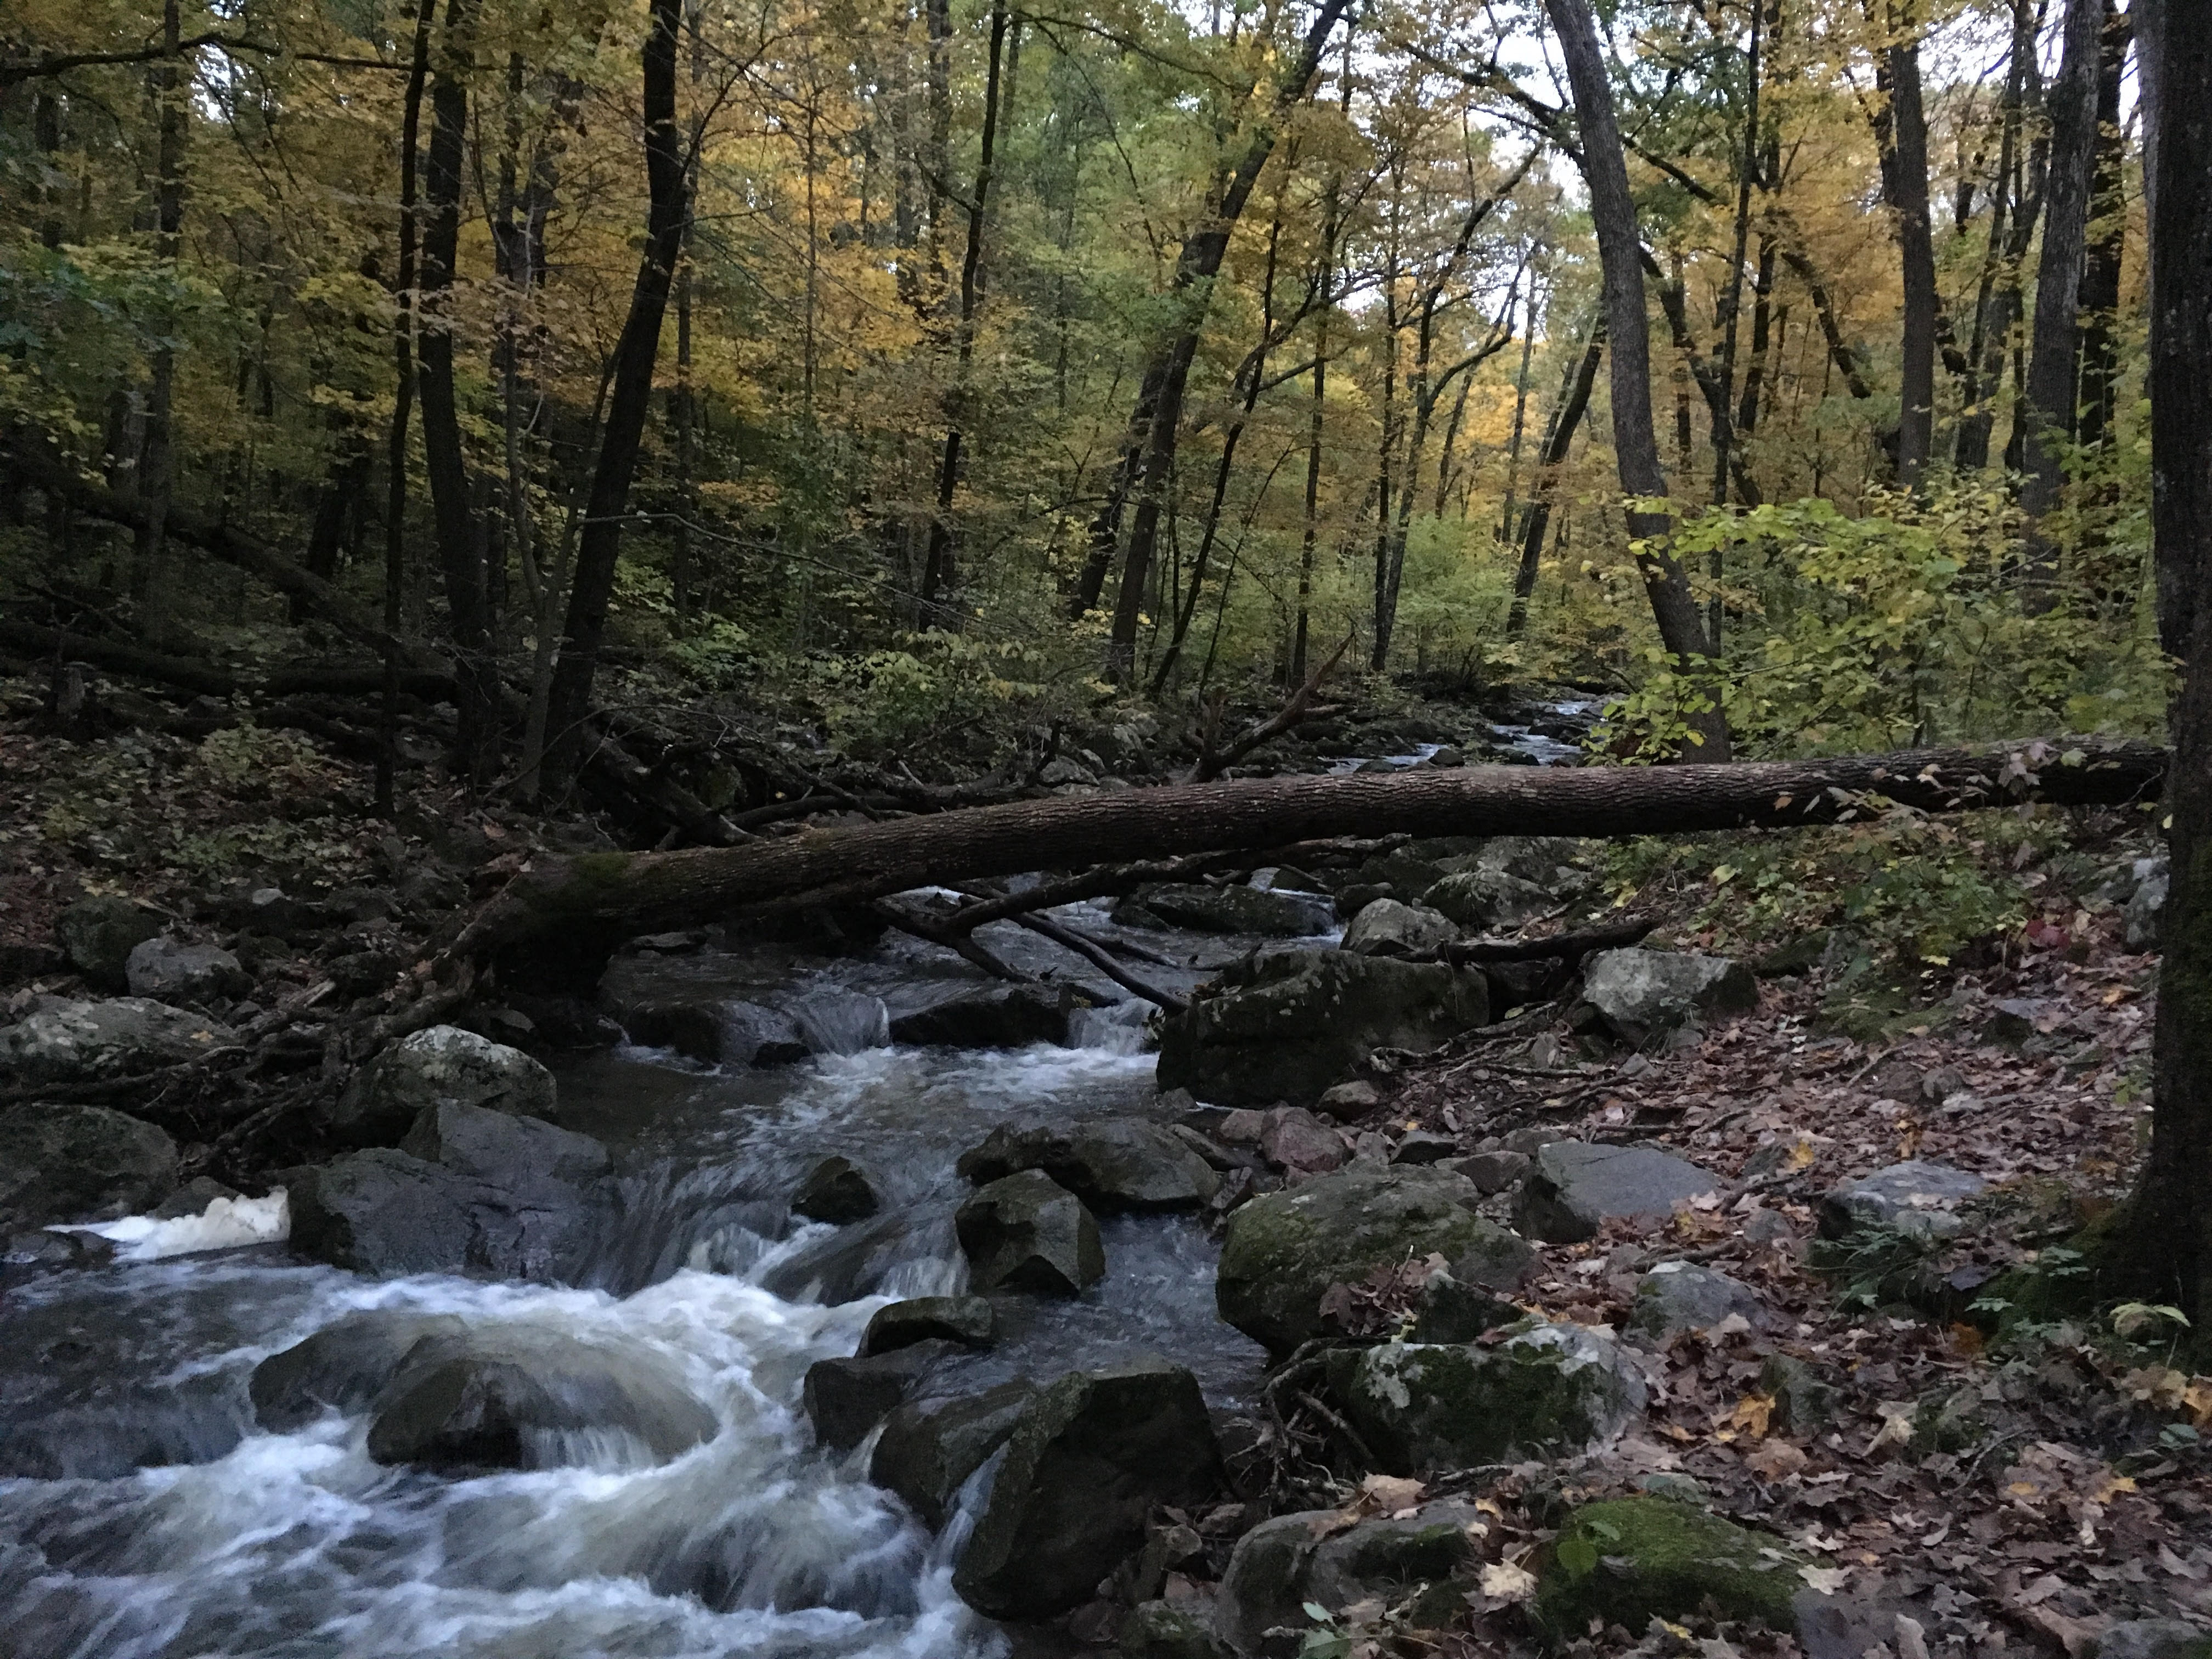 A river winding through a forest in early fall